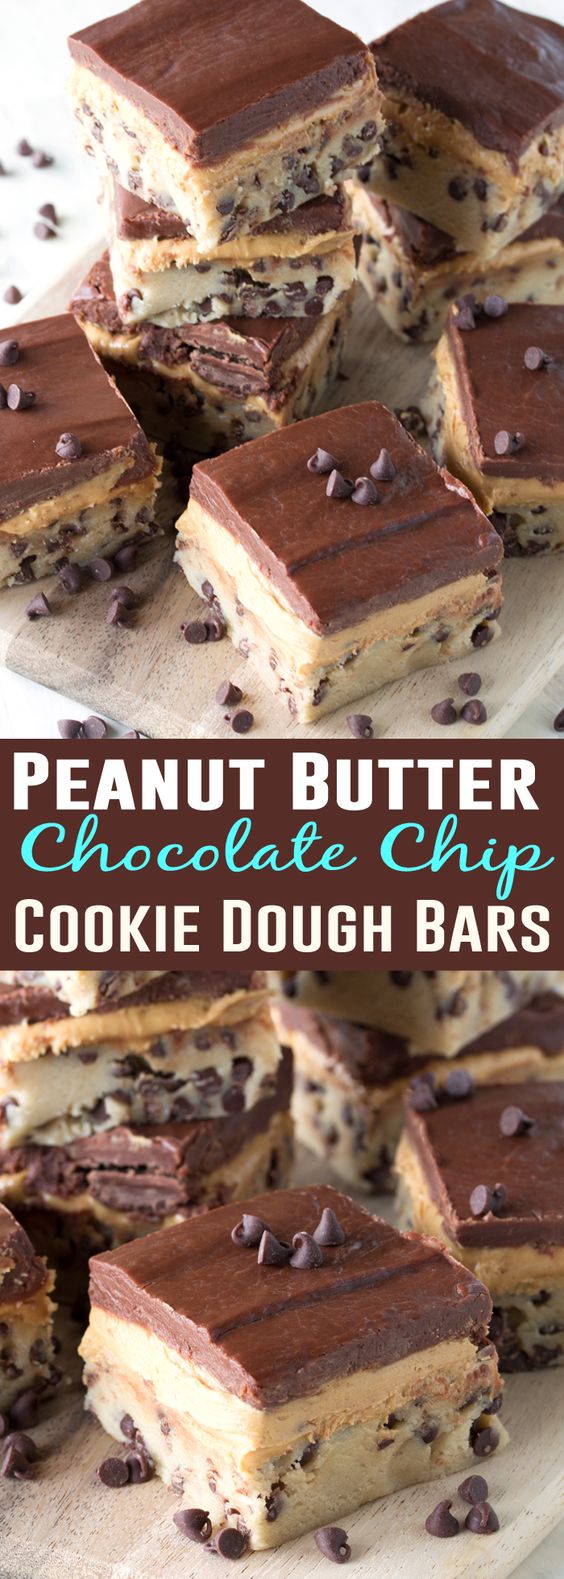 No-Bake-Peanut-Butter-Chocolate-Chip-Cookie-Dough-Bars